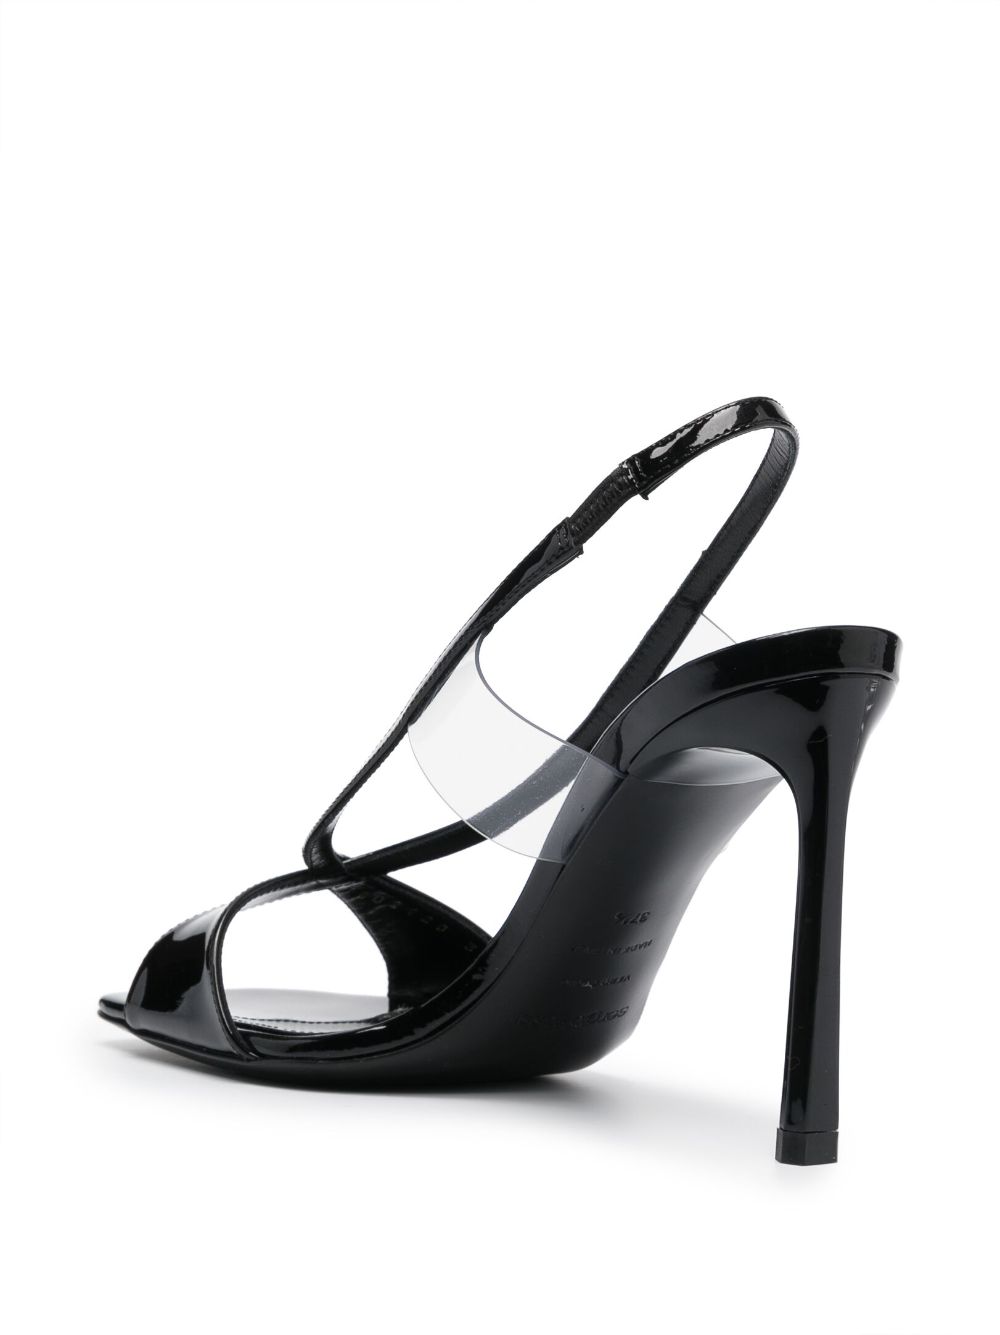 SERGIO ROSSI Statement-Making 105MM Leather Sandals for Women